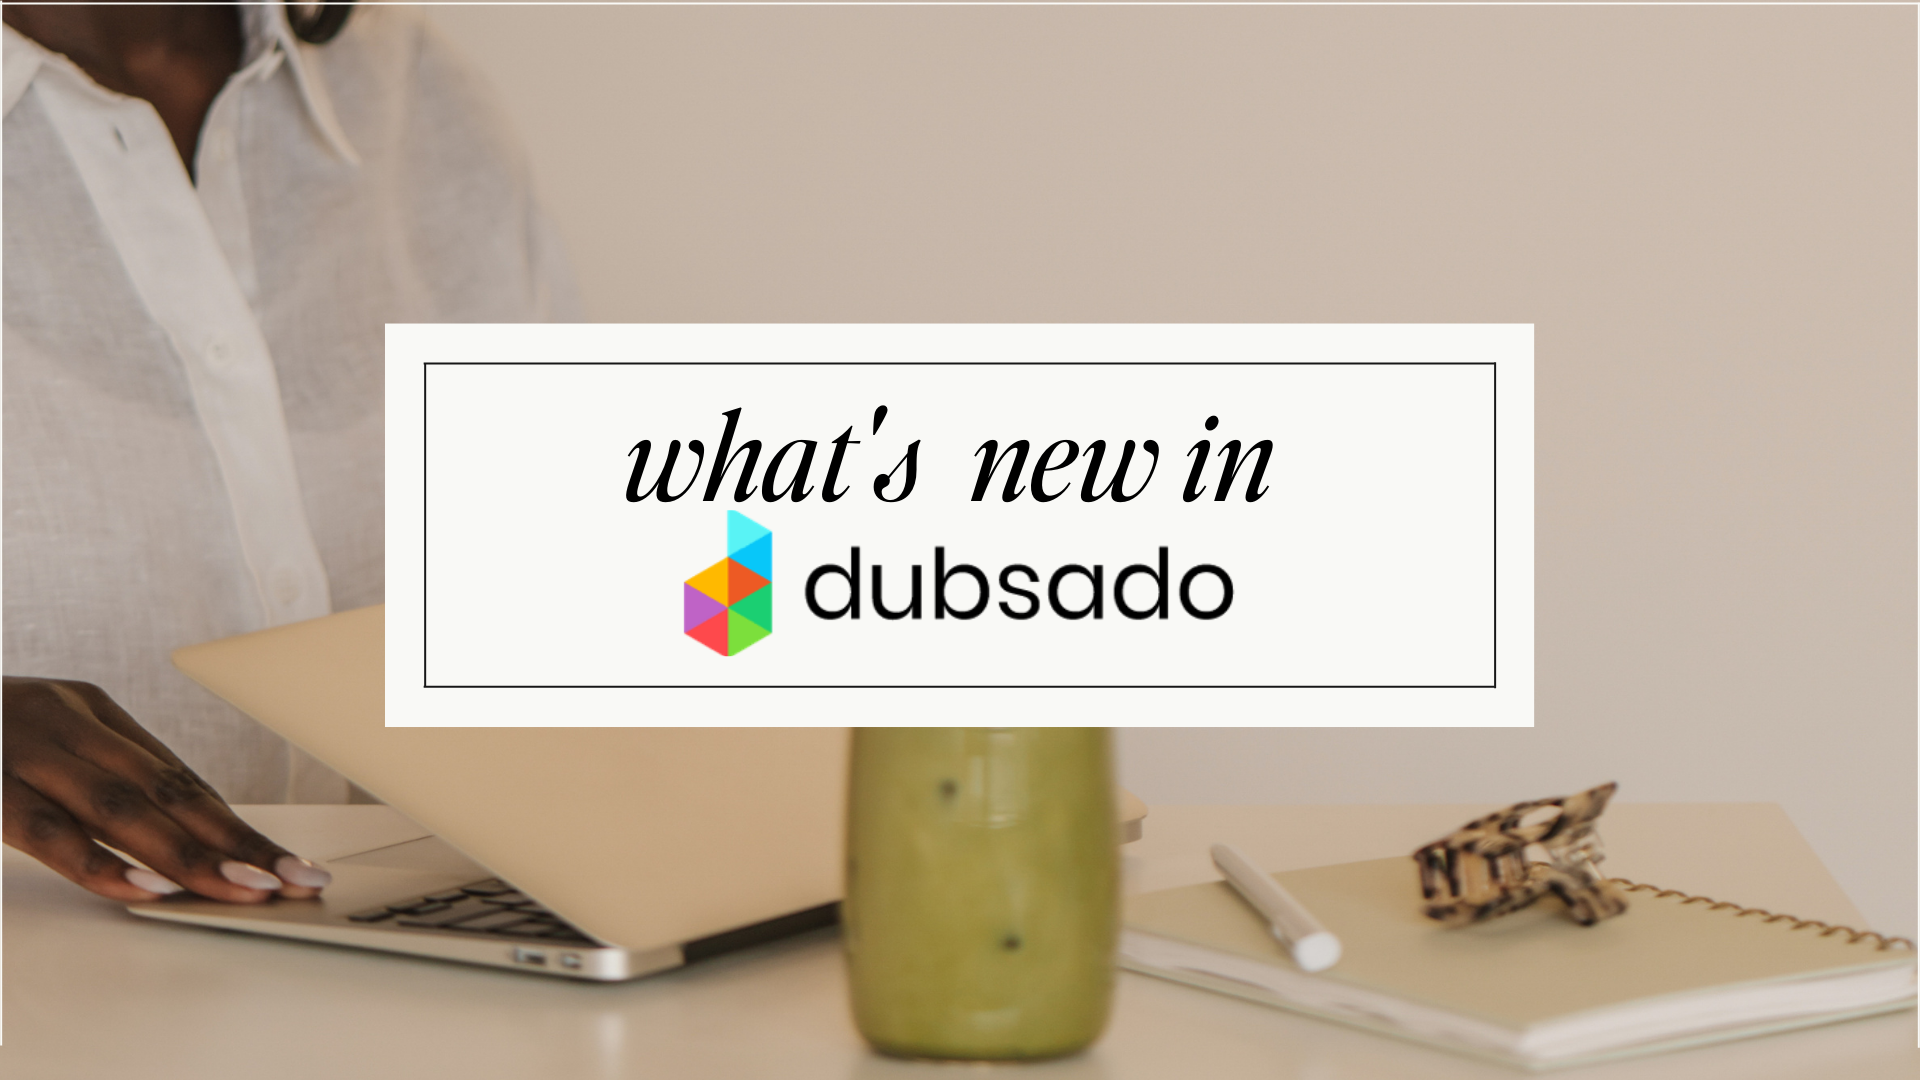 woman opening laptop with matcha latte on desk with the words "What's new in Dubsado" overtop